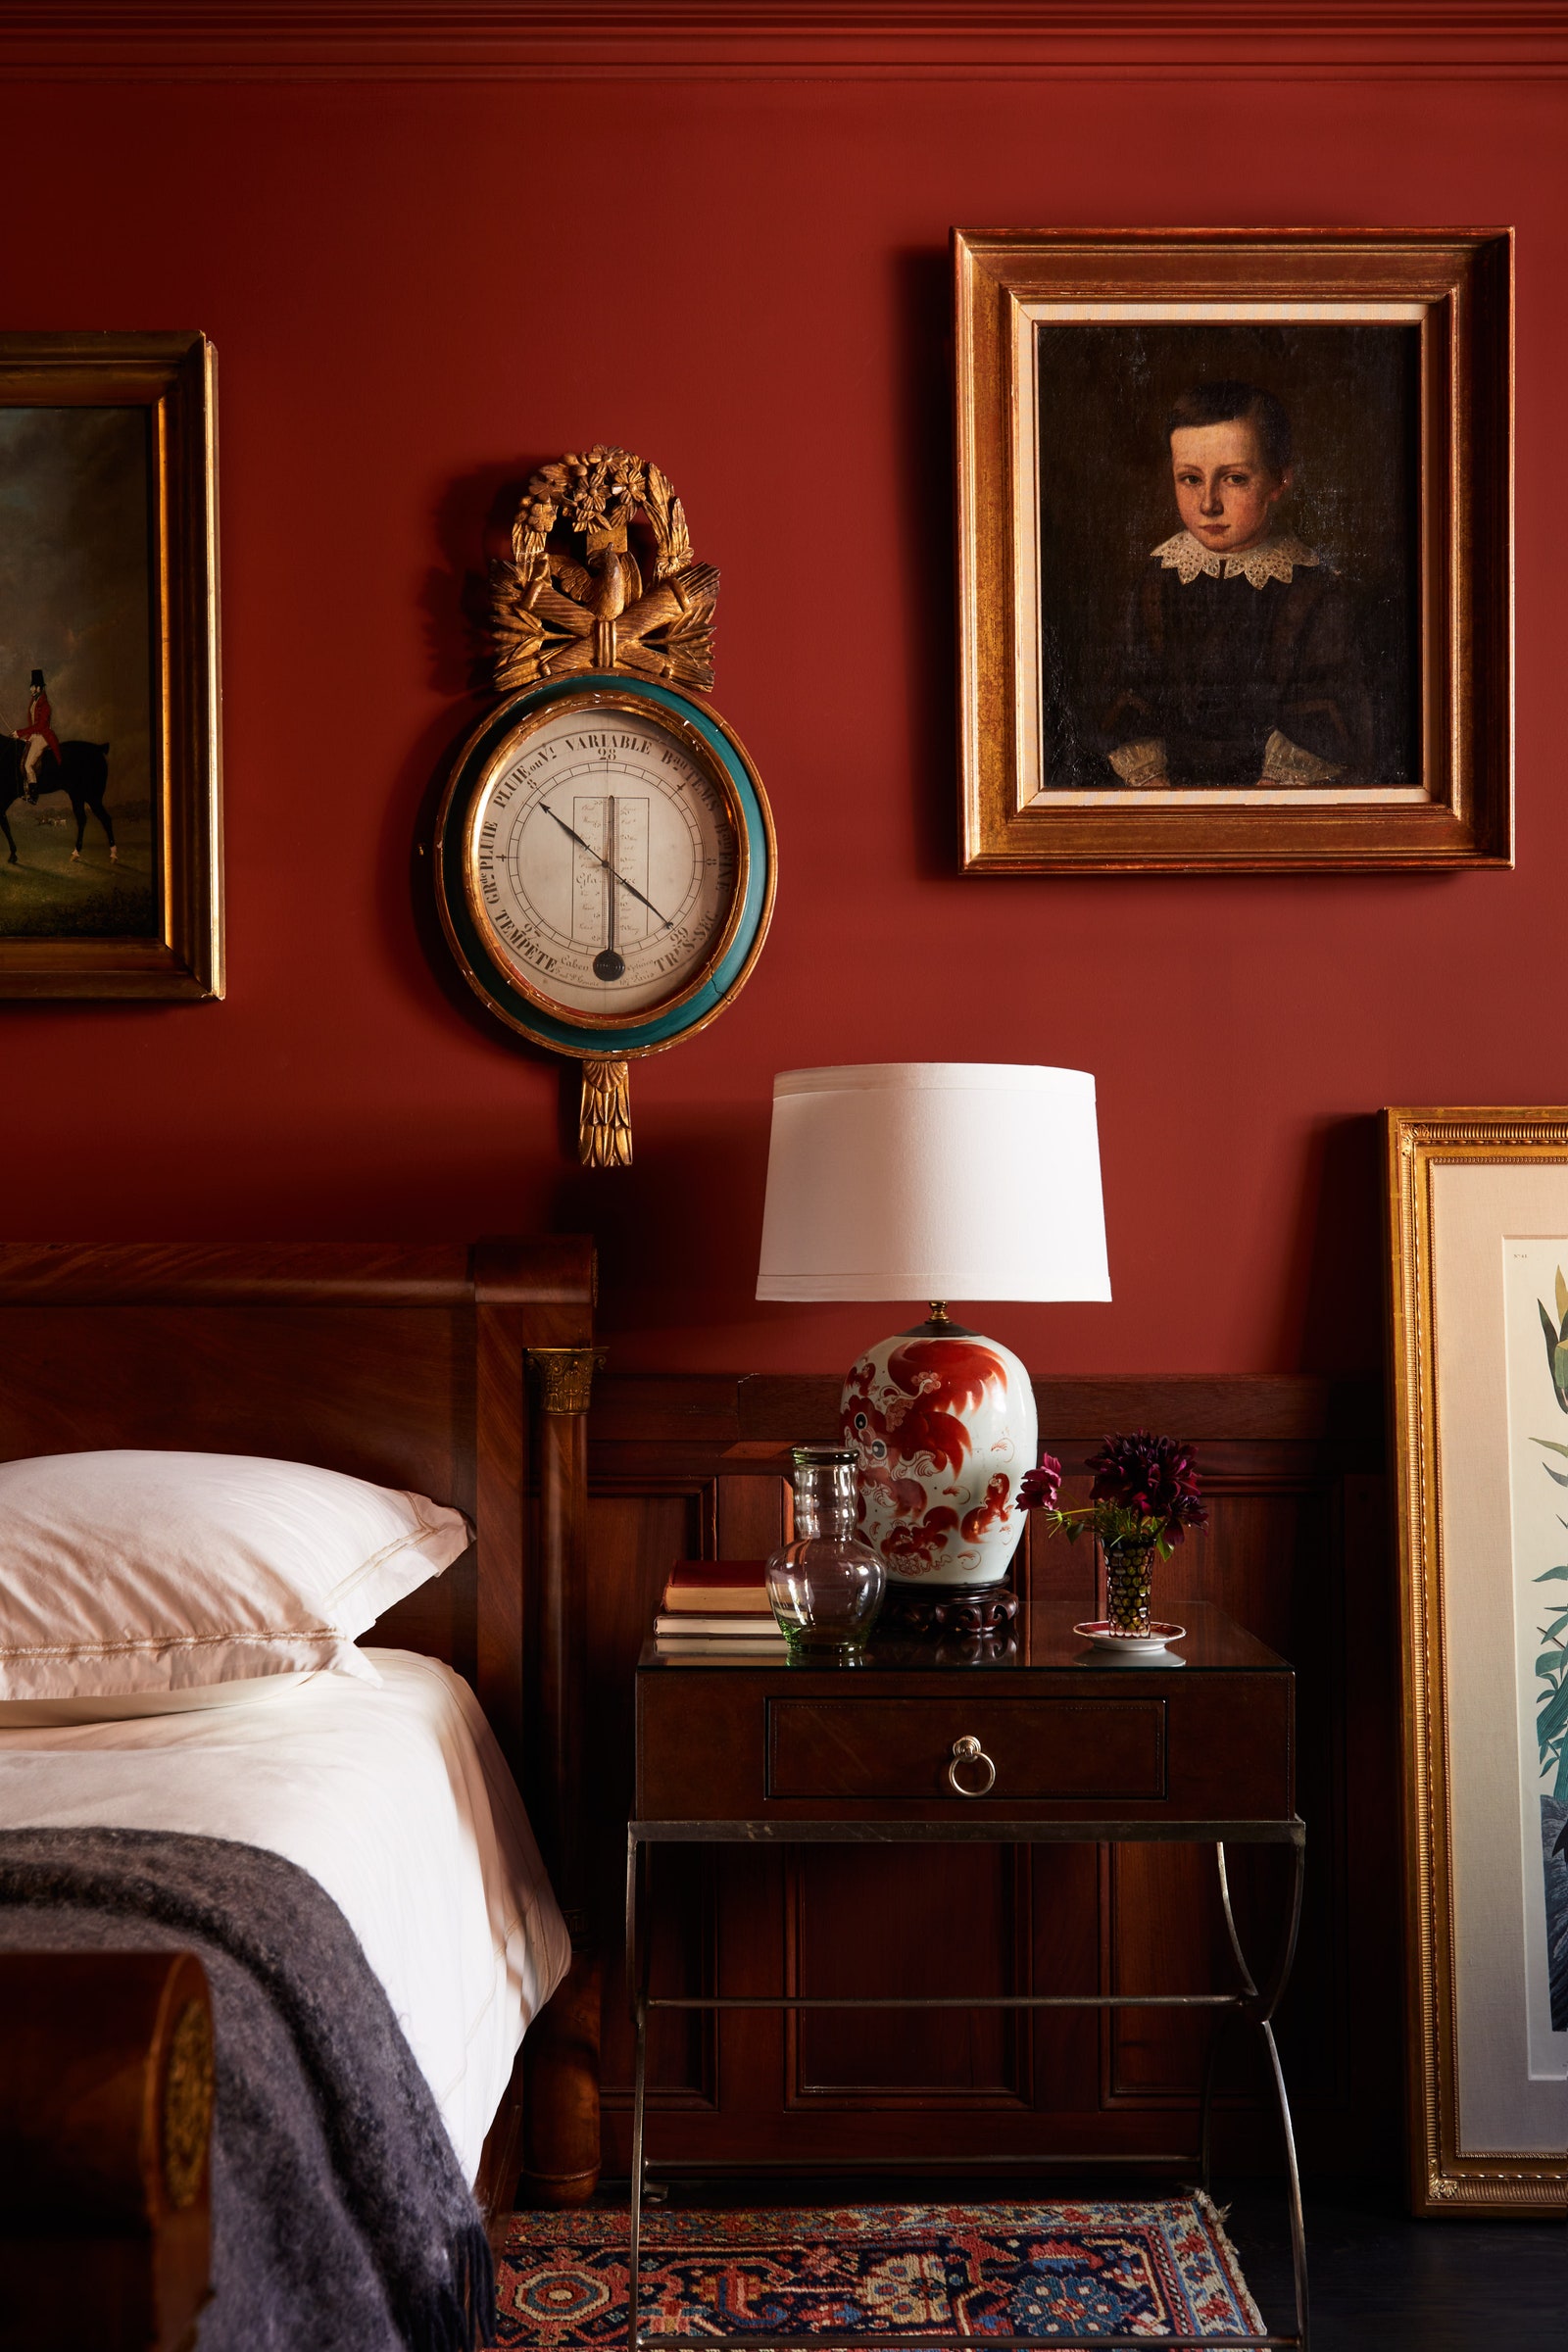 Guest room with red painted walls art antiques